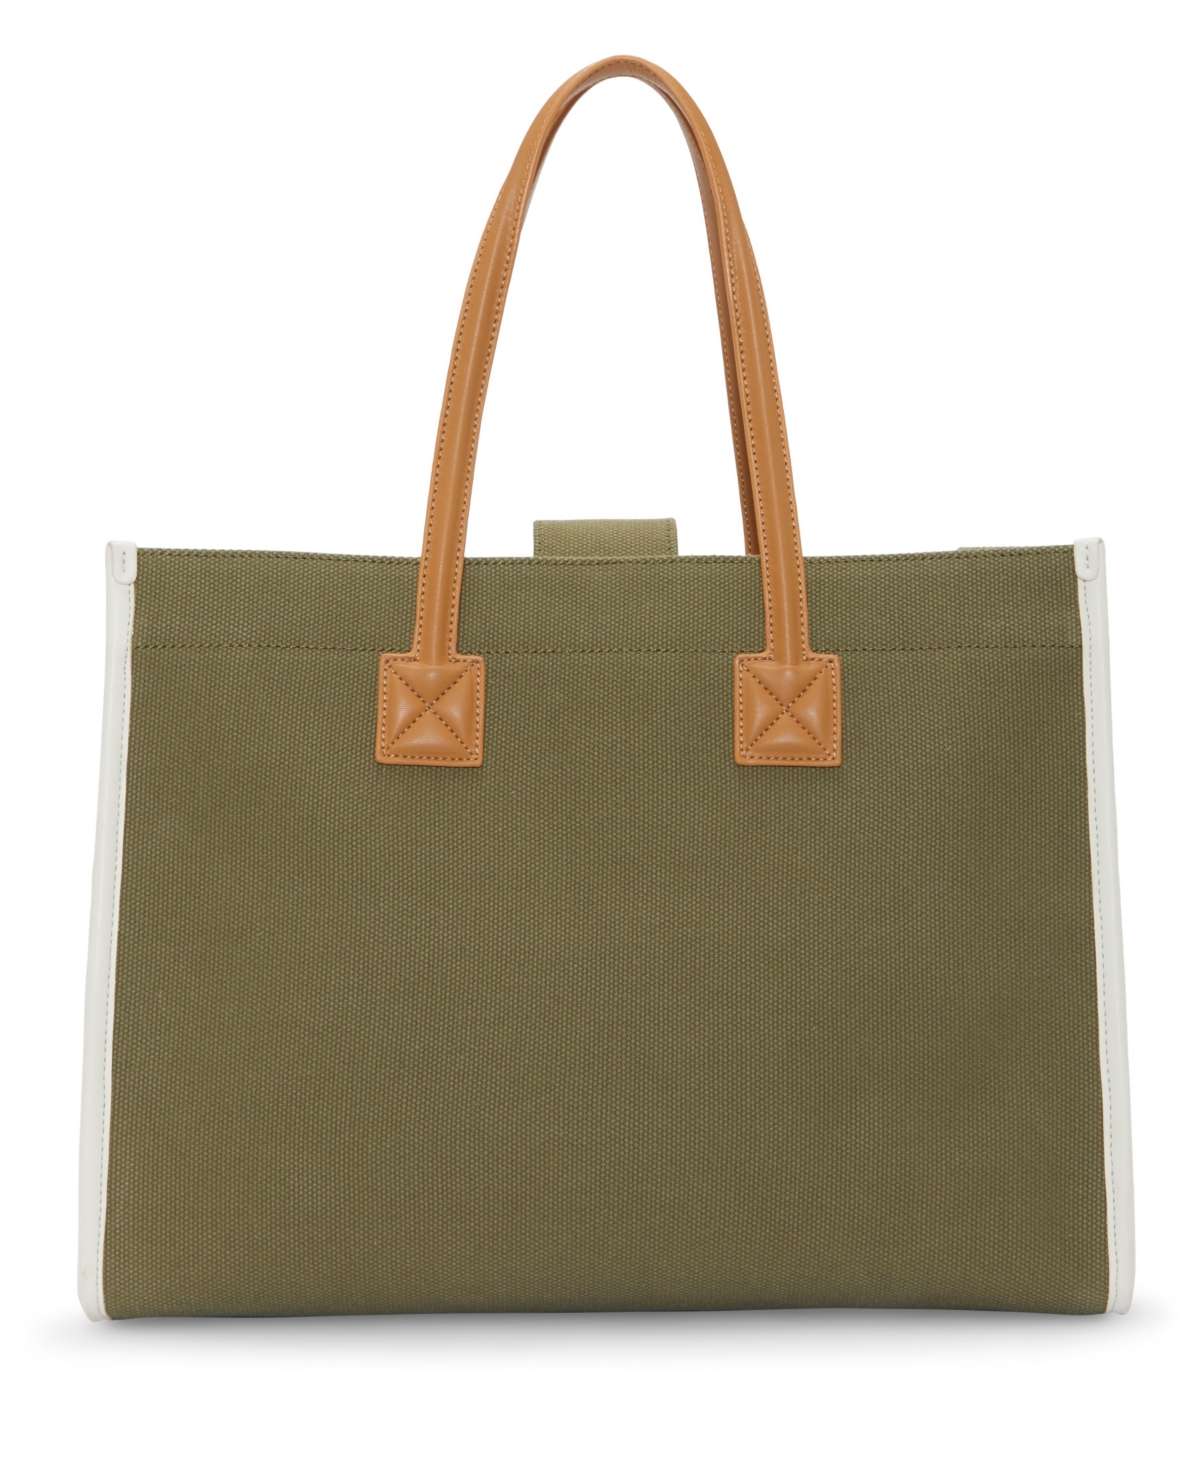 VINCE CAMUTO SALY TOTE